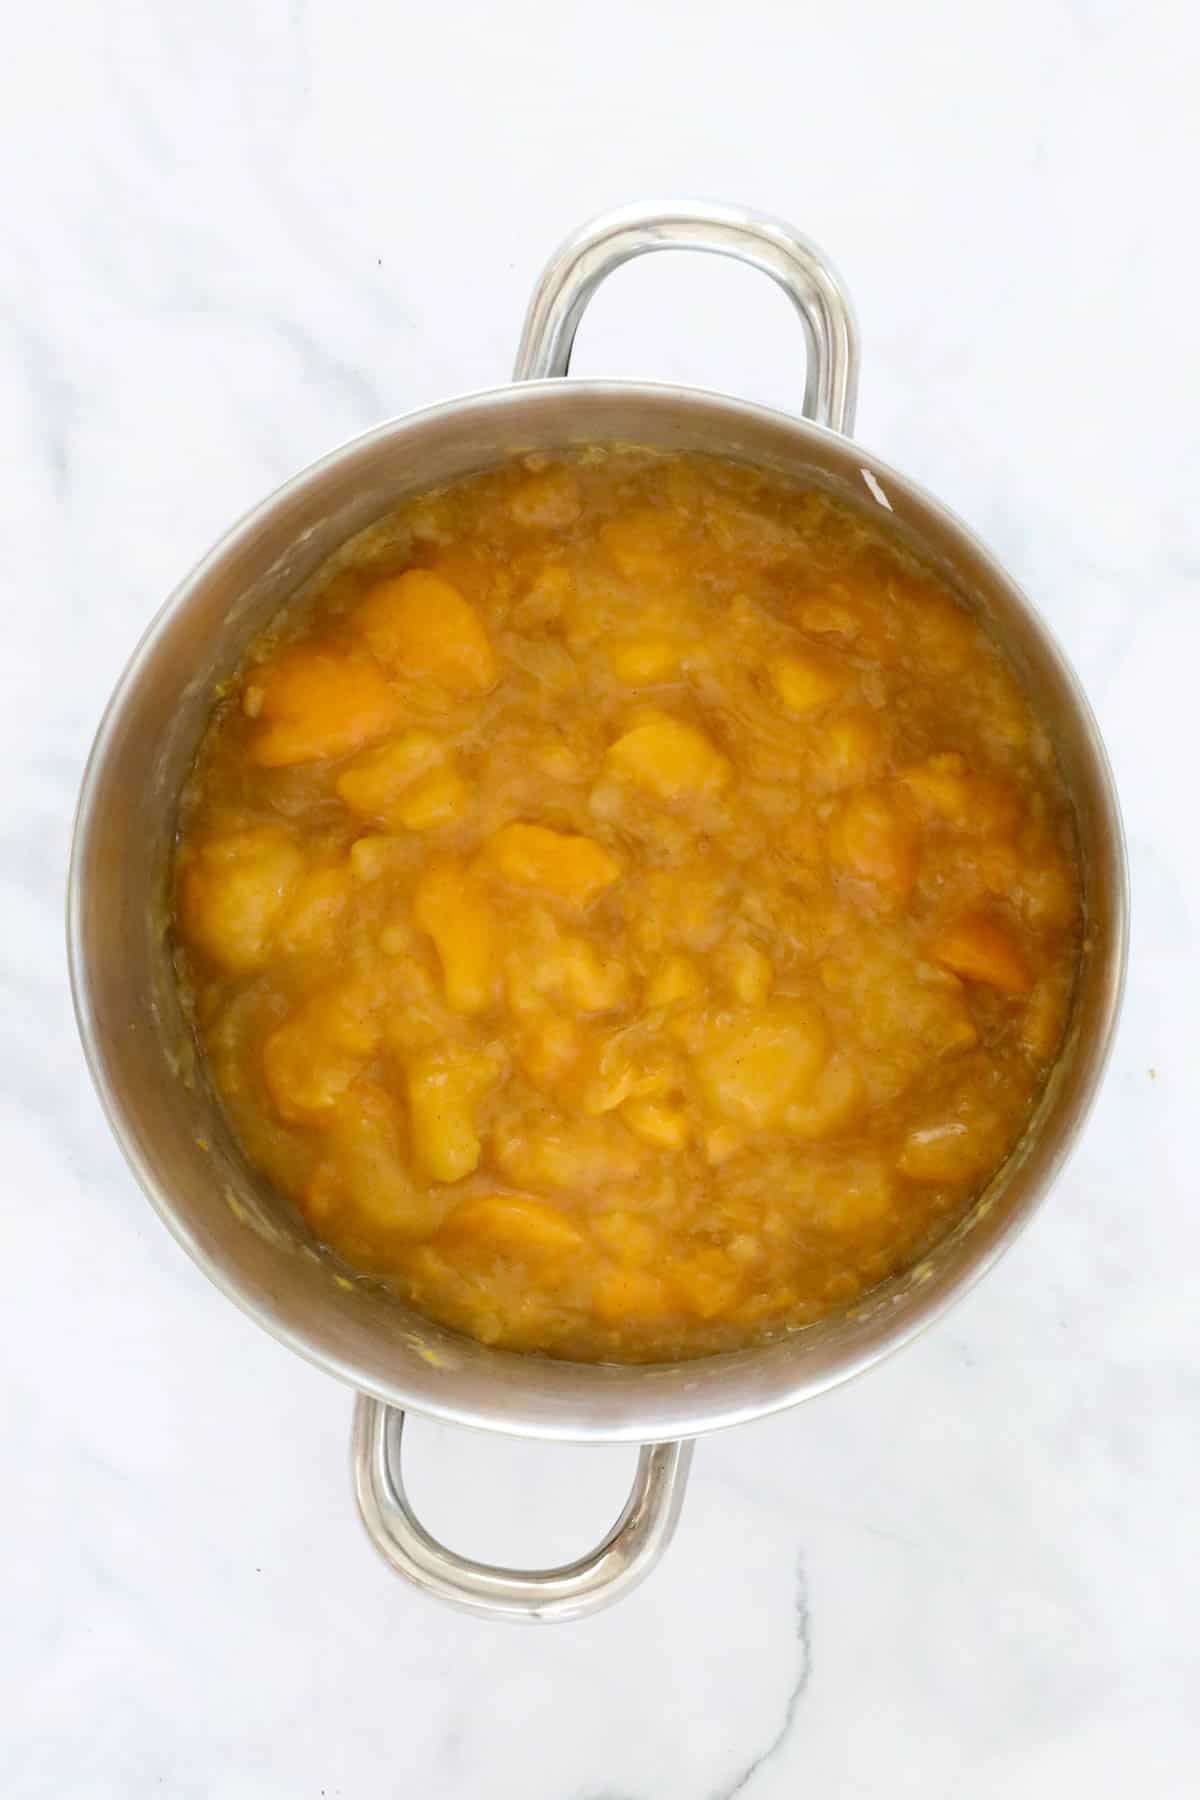 Apricots and thickened syrup in the saucepan.